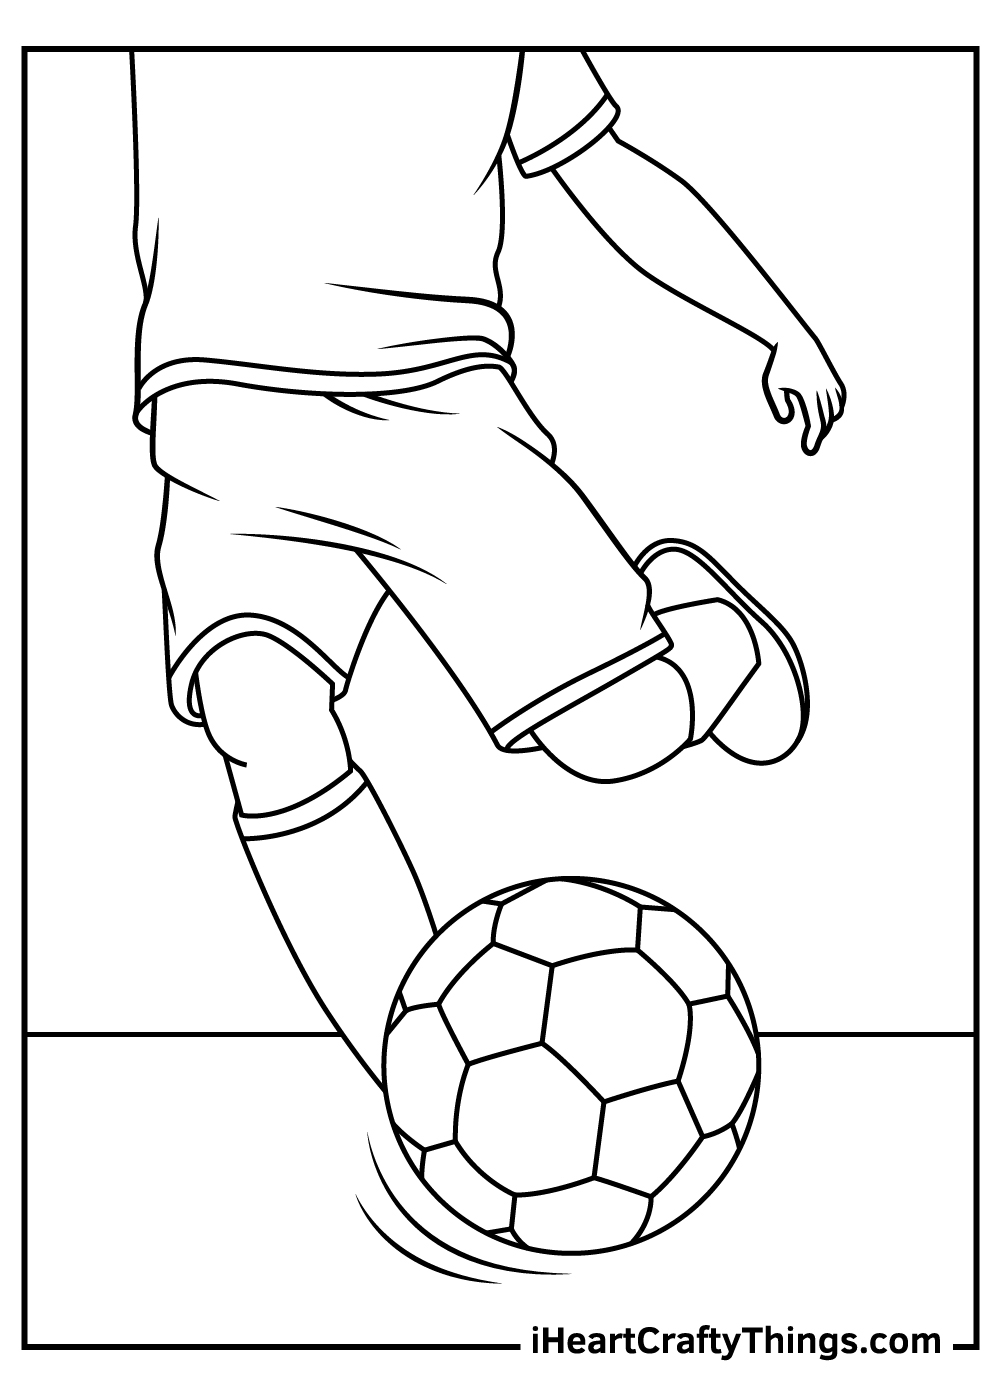 Printable Soccer Coloring Pages Updated 2021